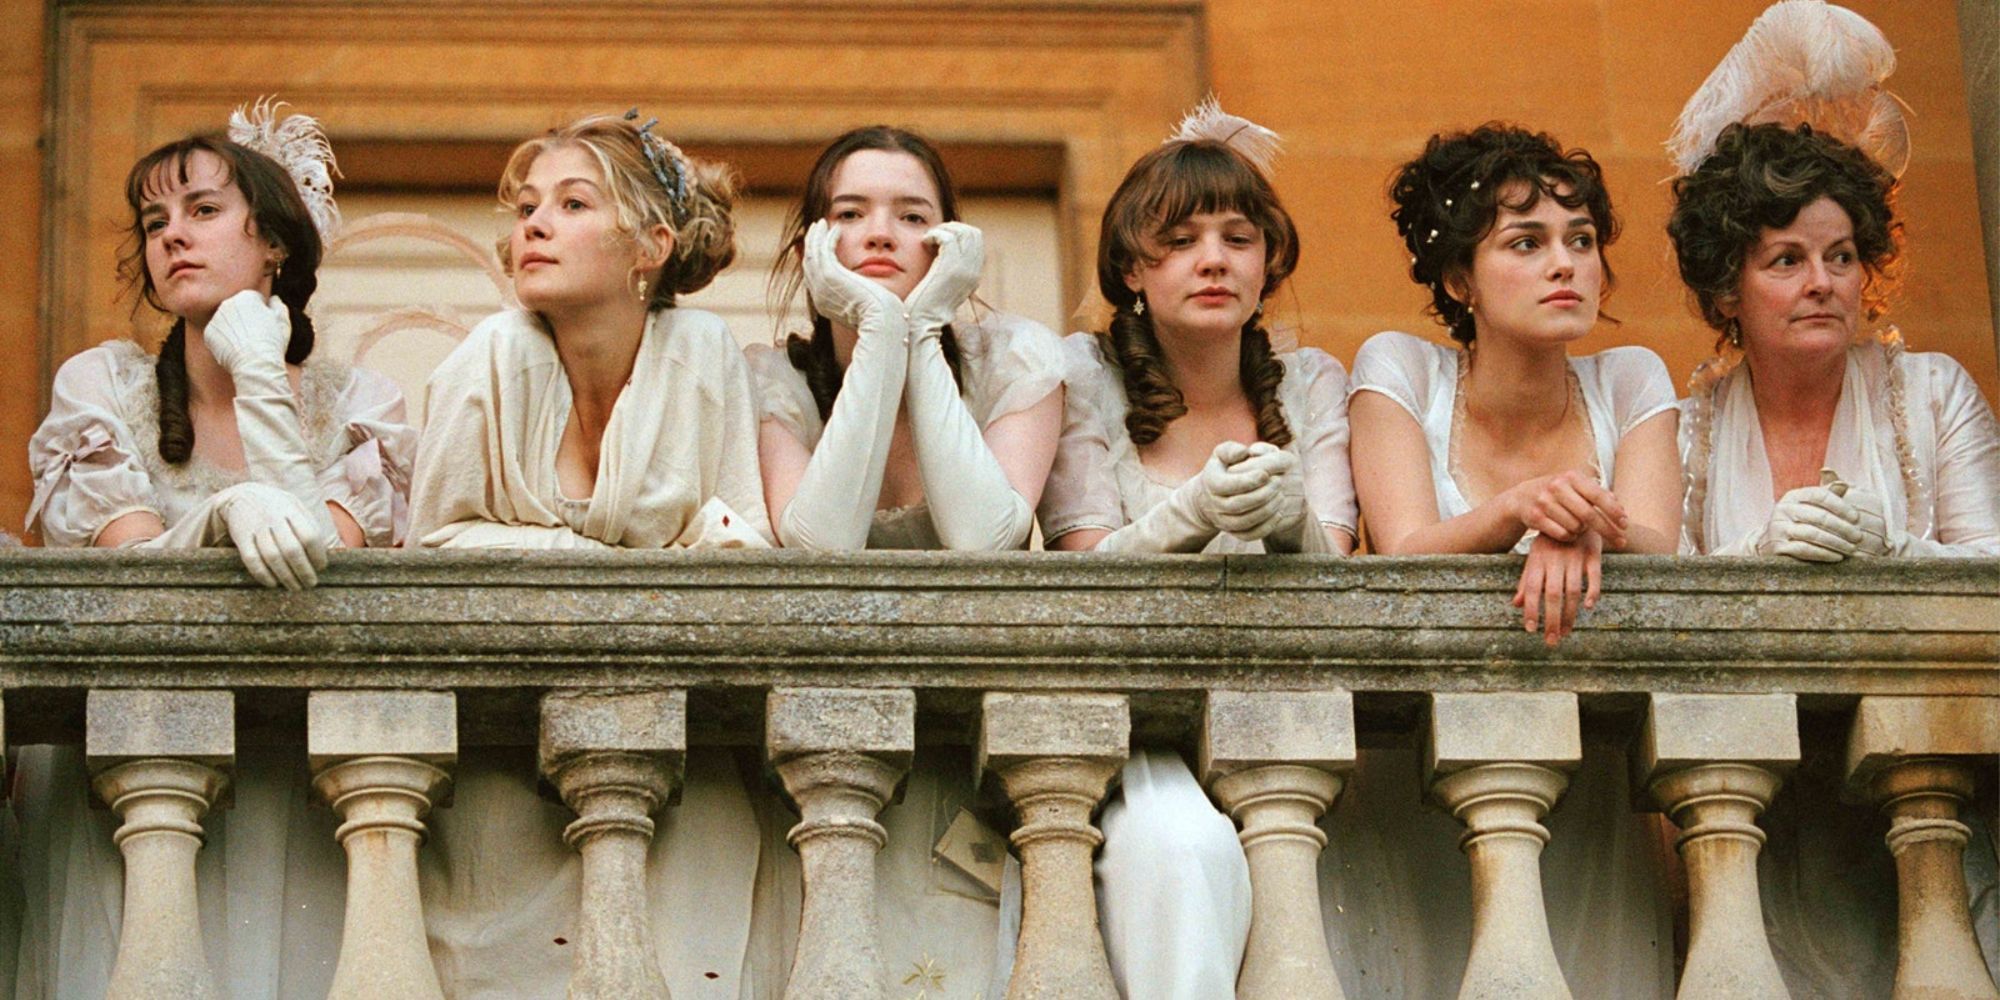 The Bennet sisters and their mother in white gowns in Pride and Prejudice 2005